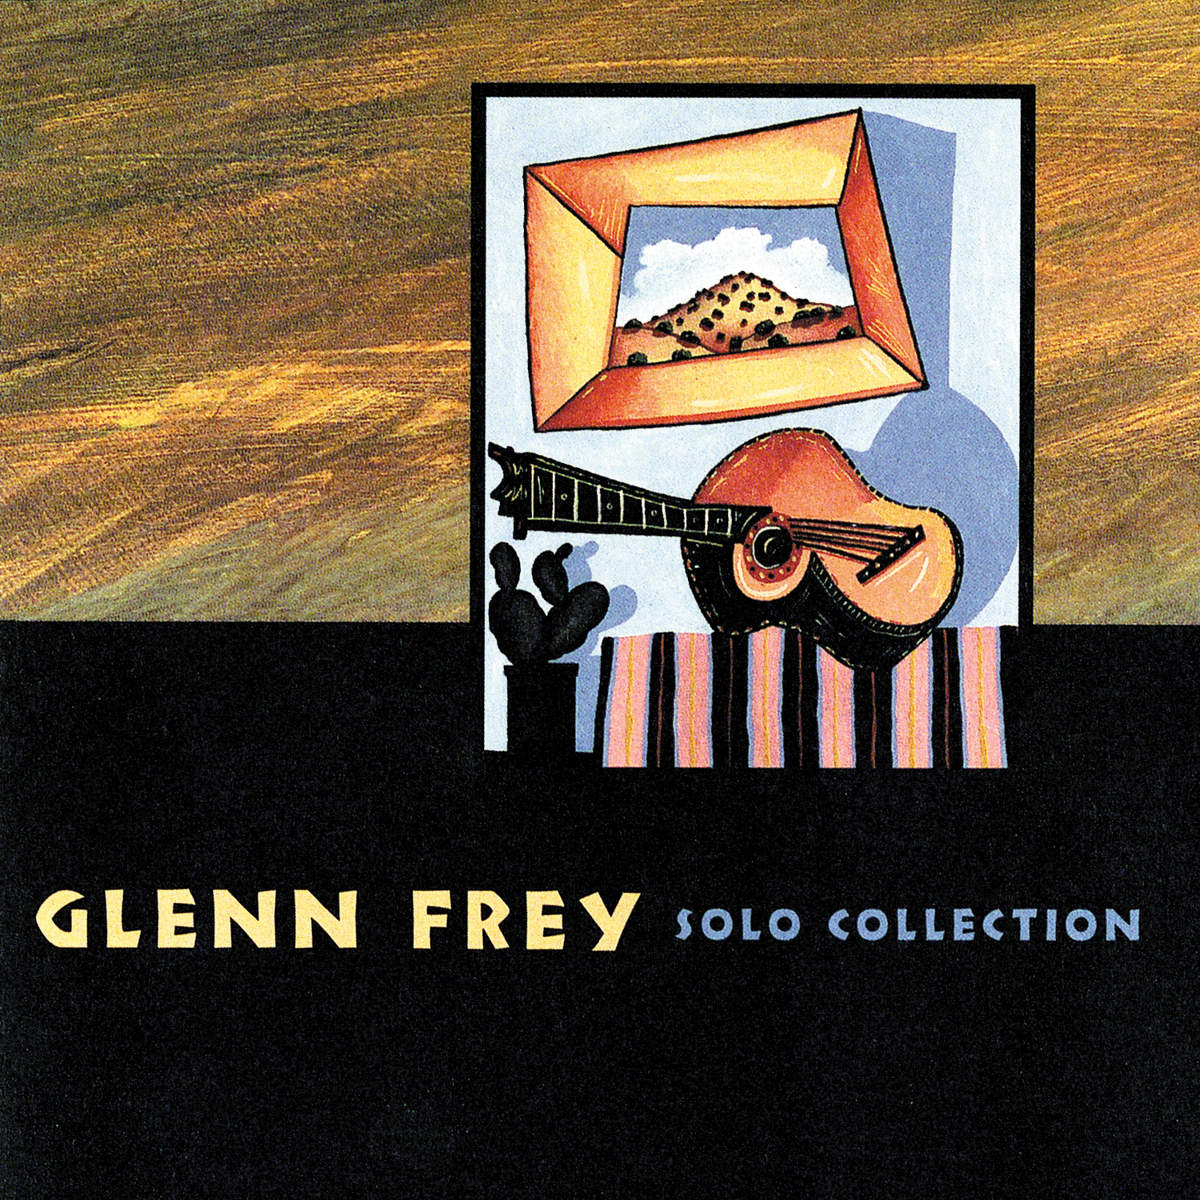 Art for The One You Love by Glenn Frey